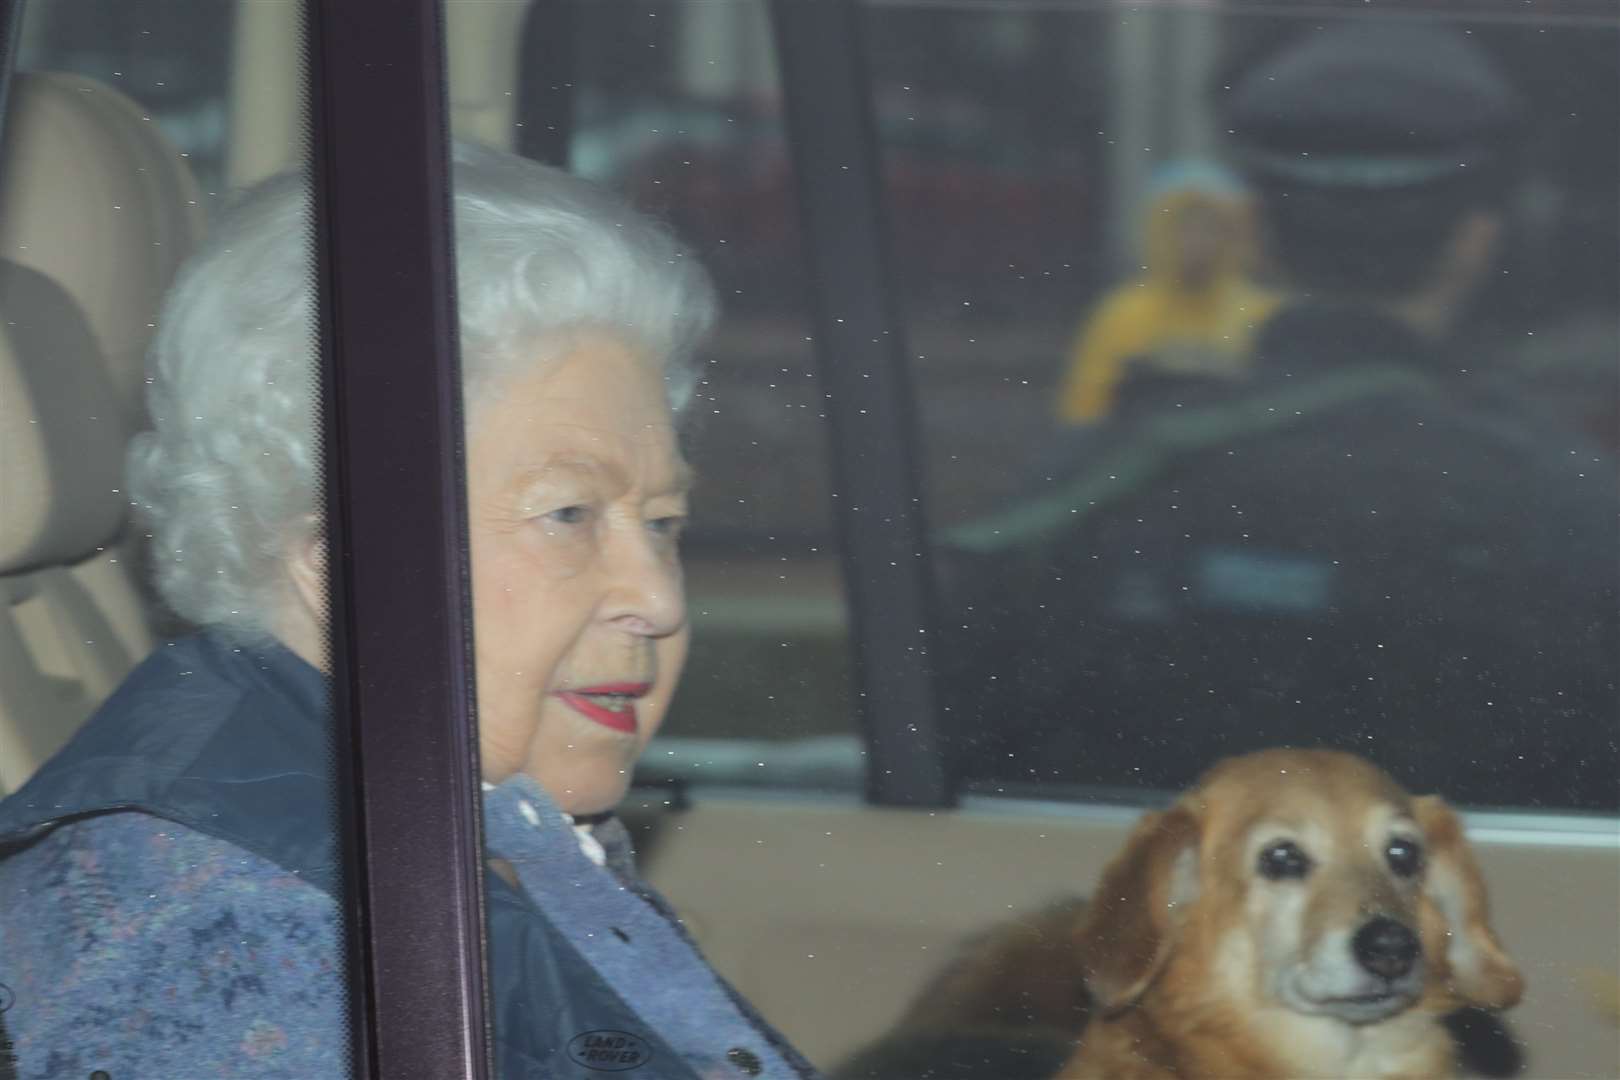 The Queen left Buckingham Palace earlier than normal for her traditional Easter break at Windsor Castle because of the virus outbreak (Aaron Chown/PA)